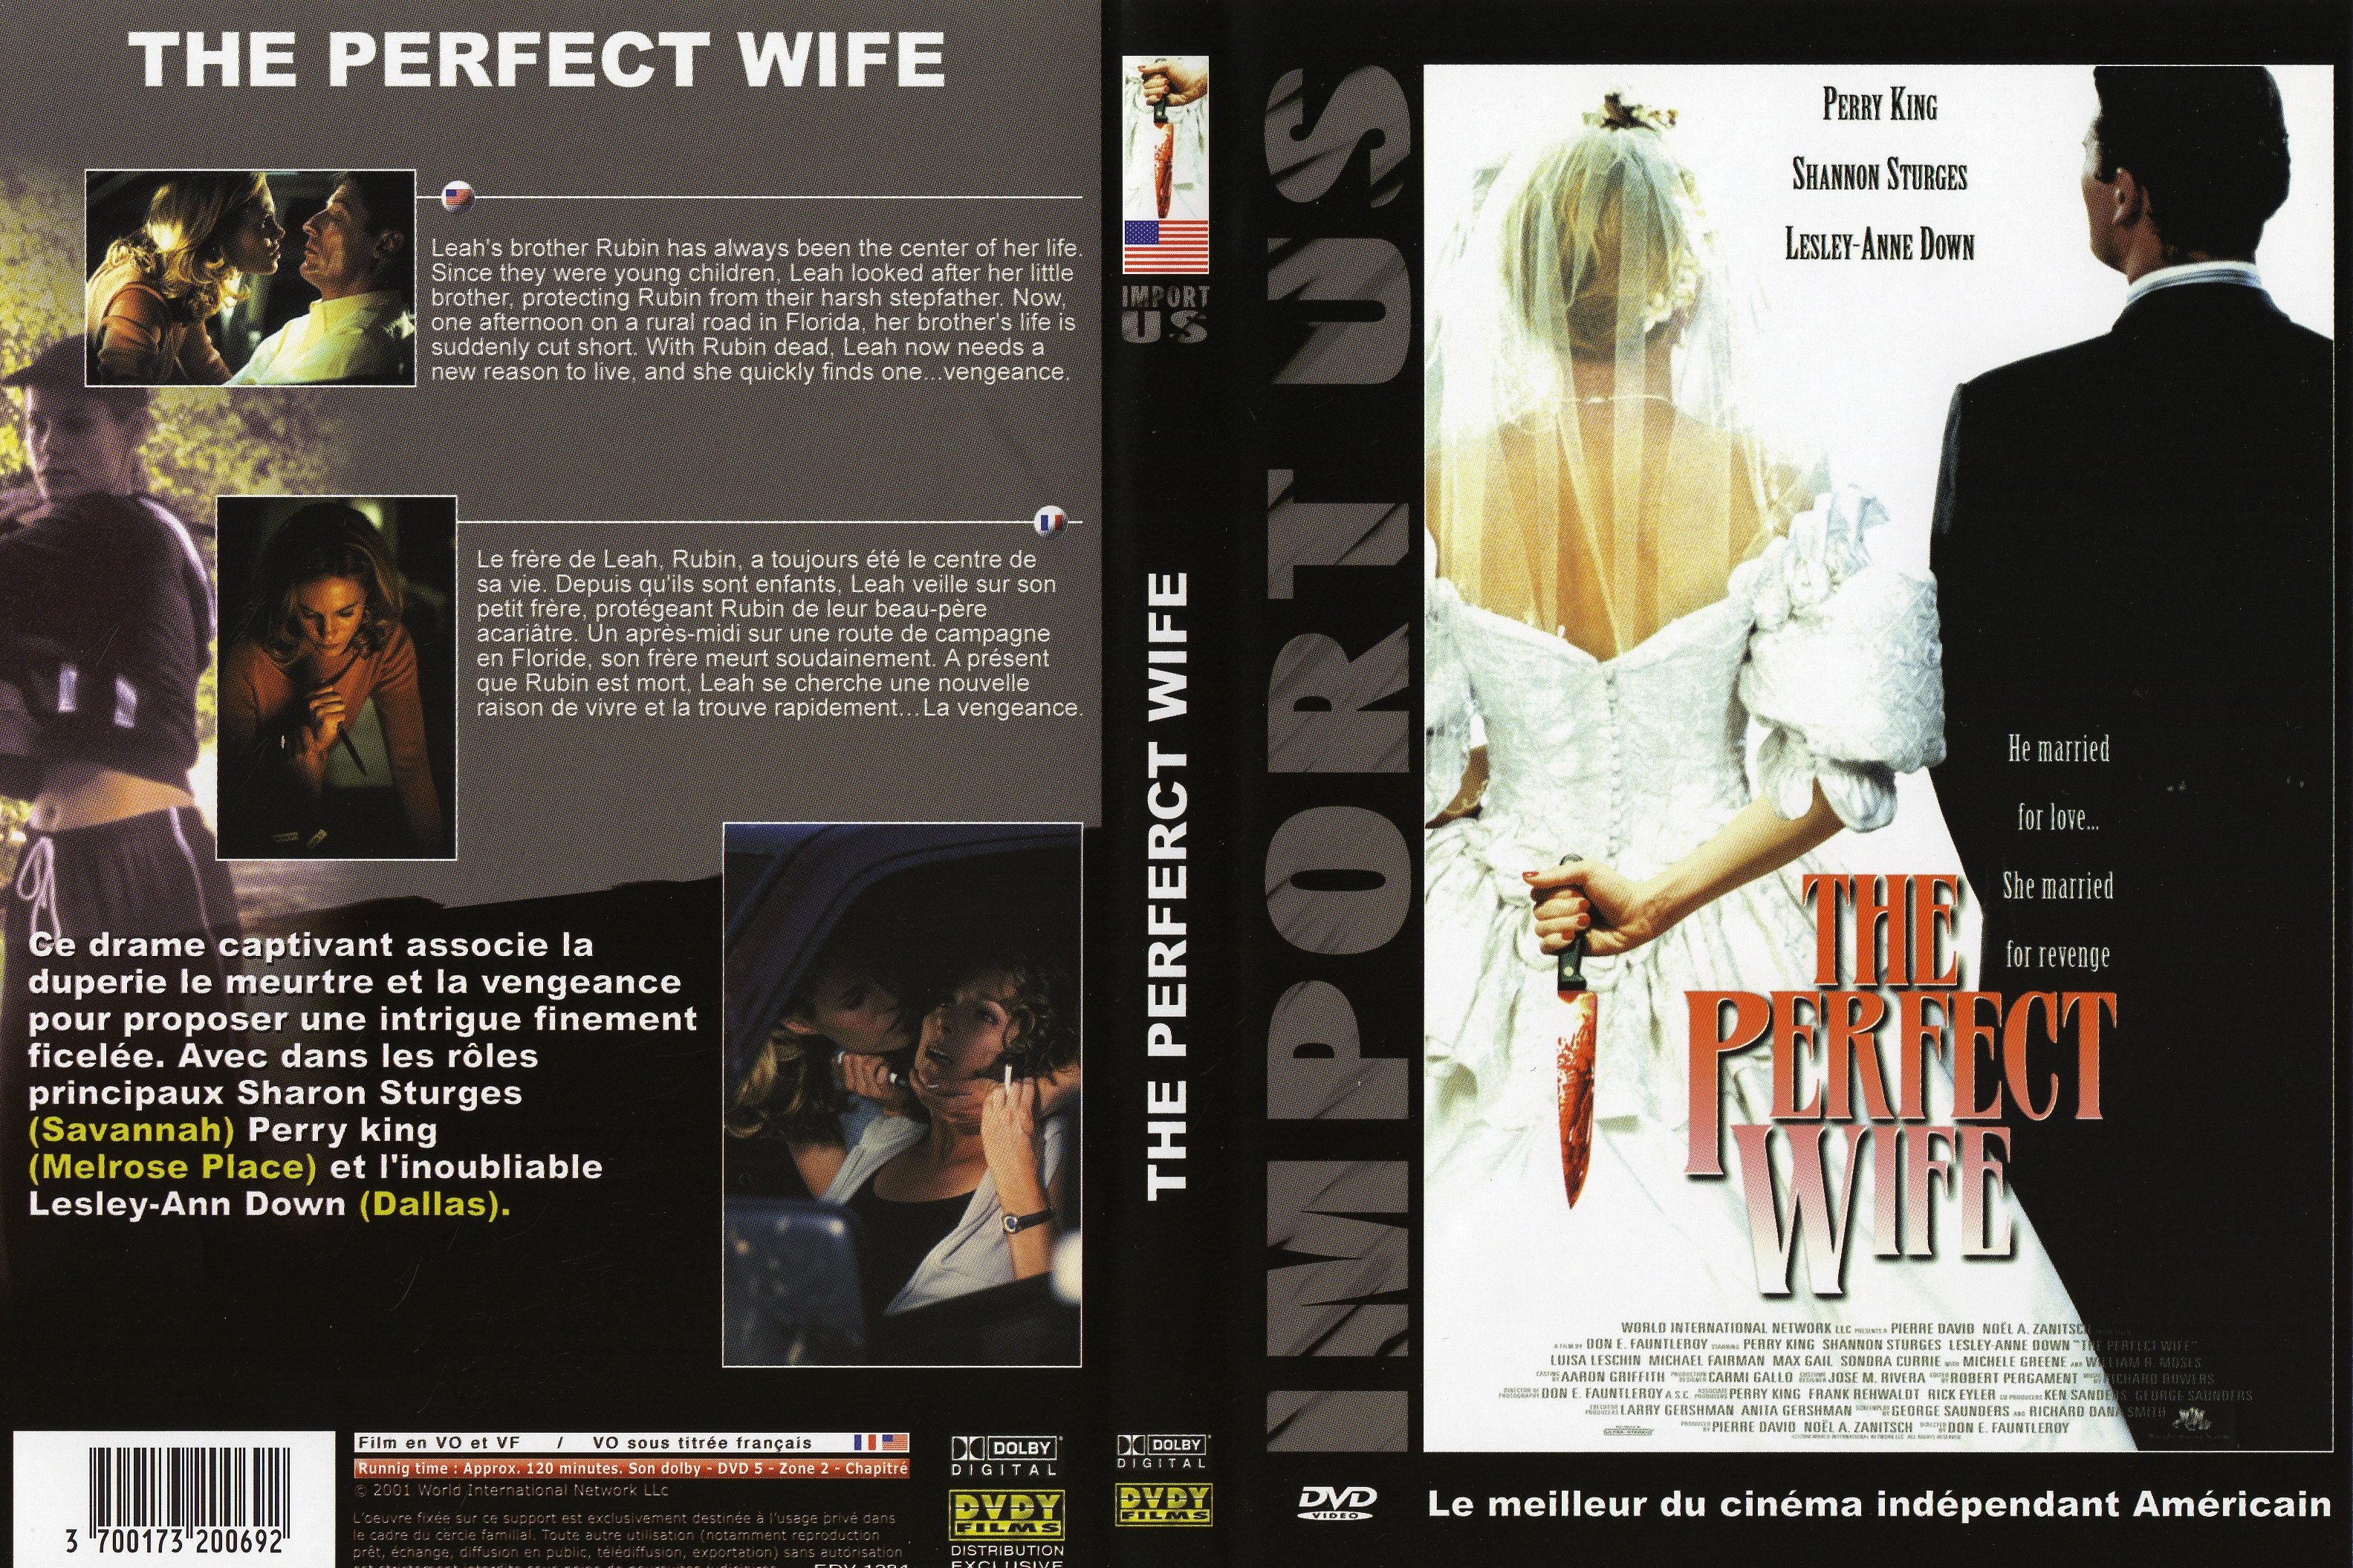 Jaquette DVD The perfect wife